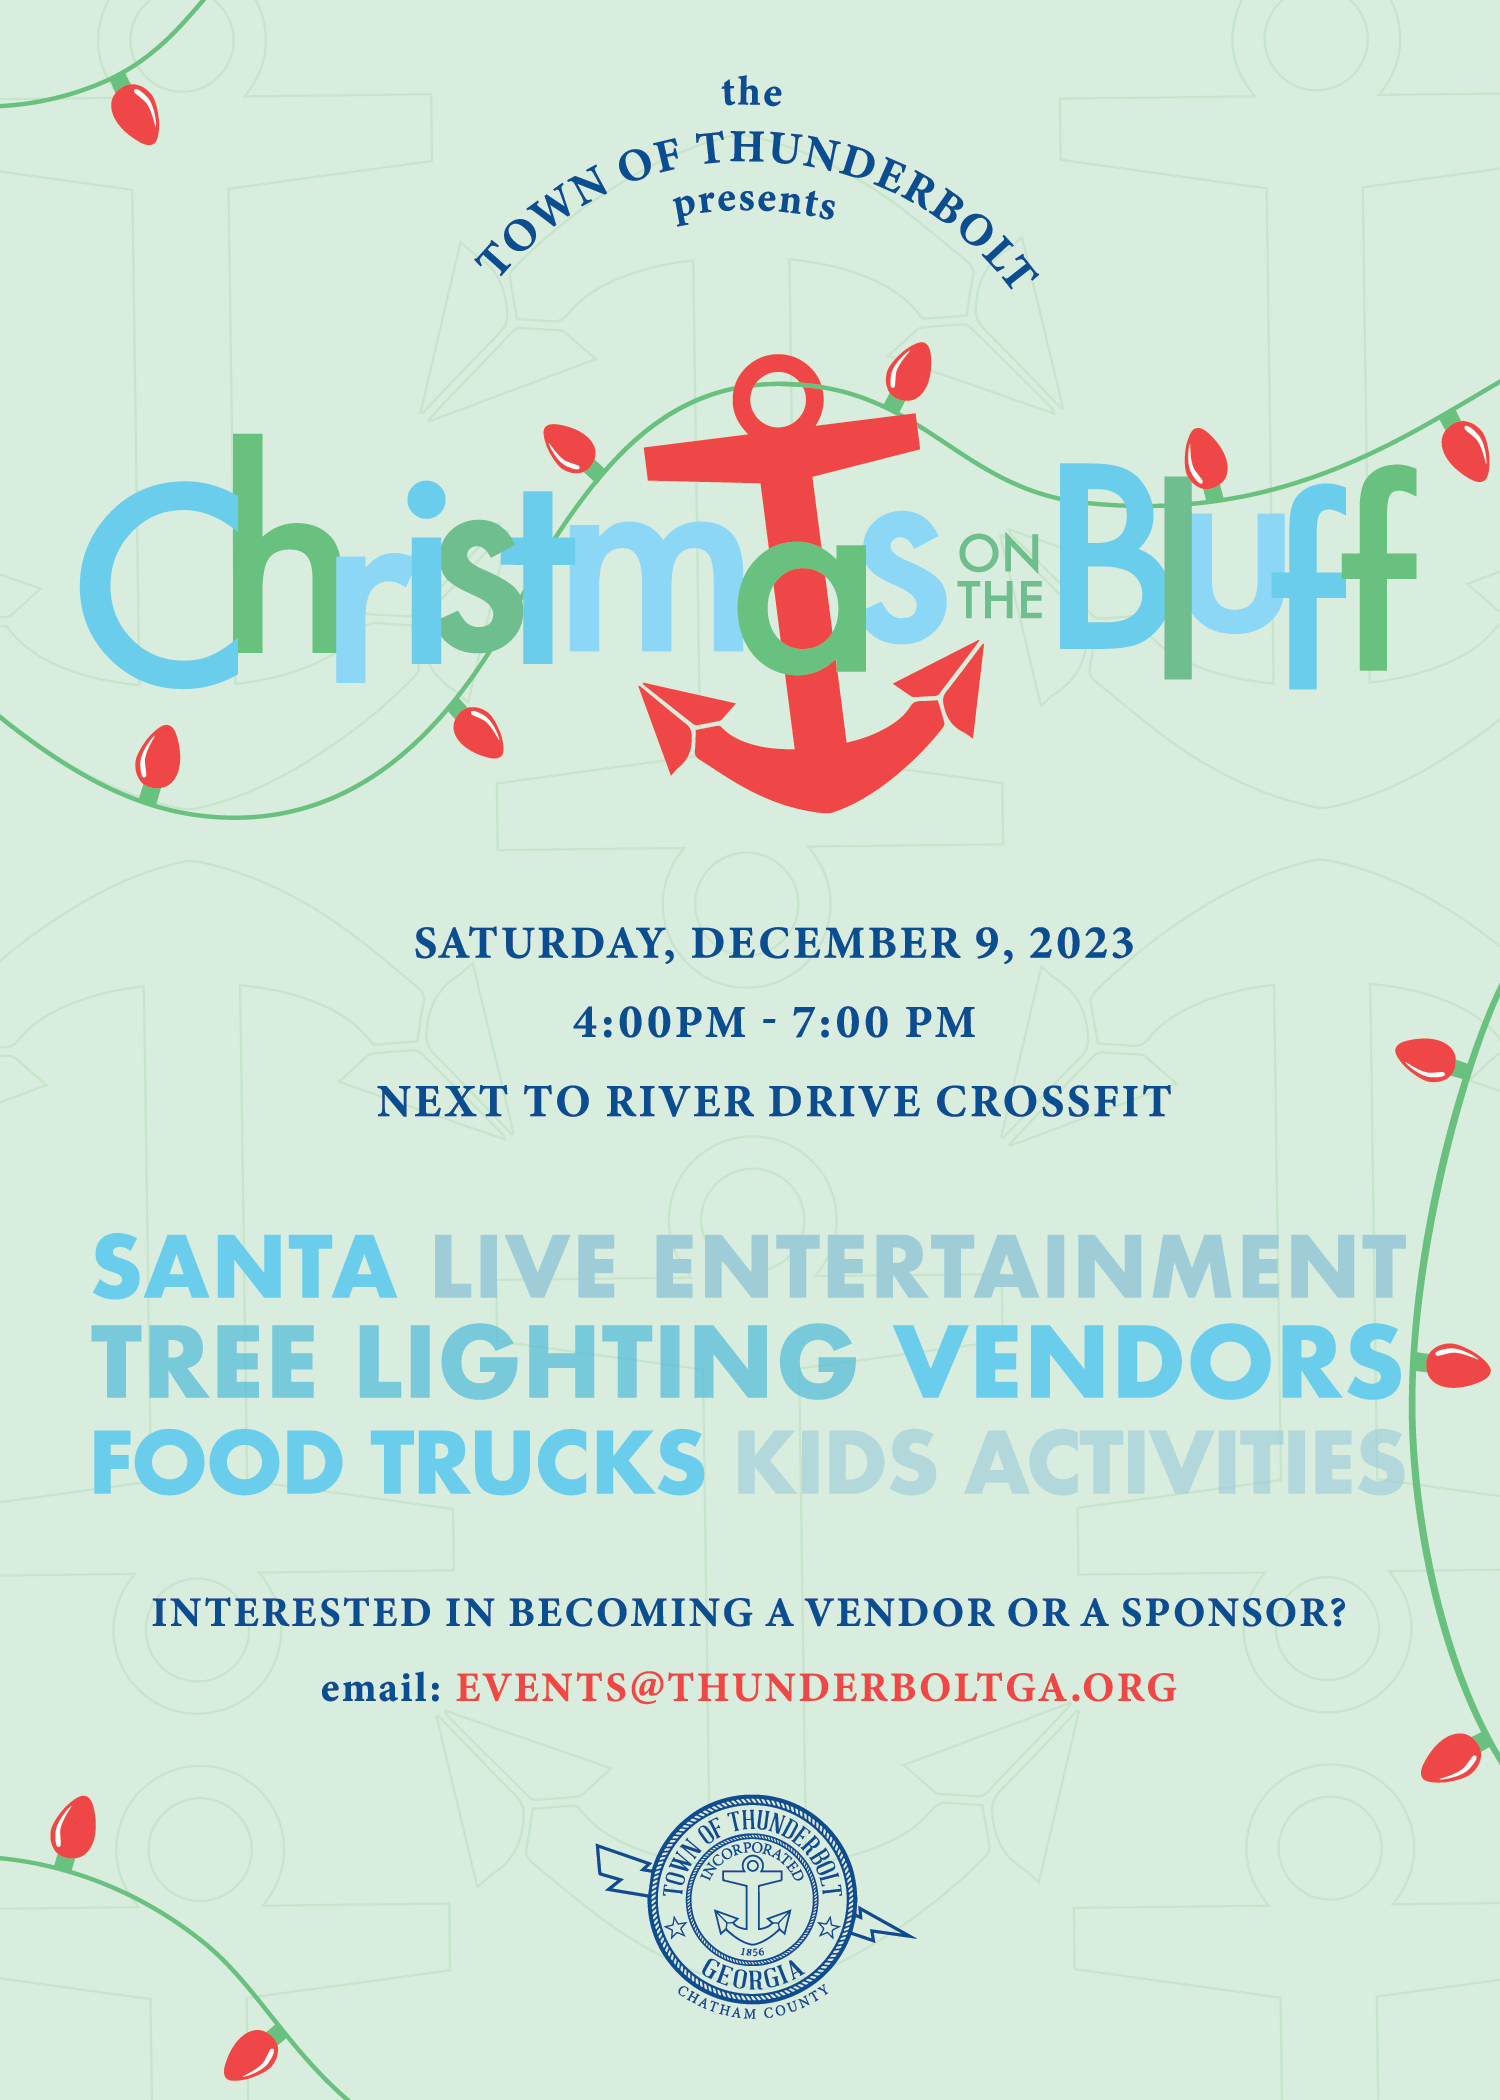 The Town of Thunderbolt Announces 2023 Christmas on the Bluff